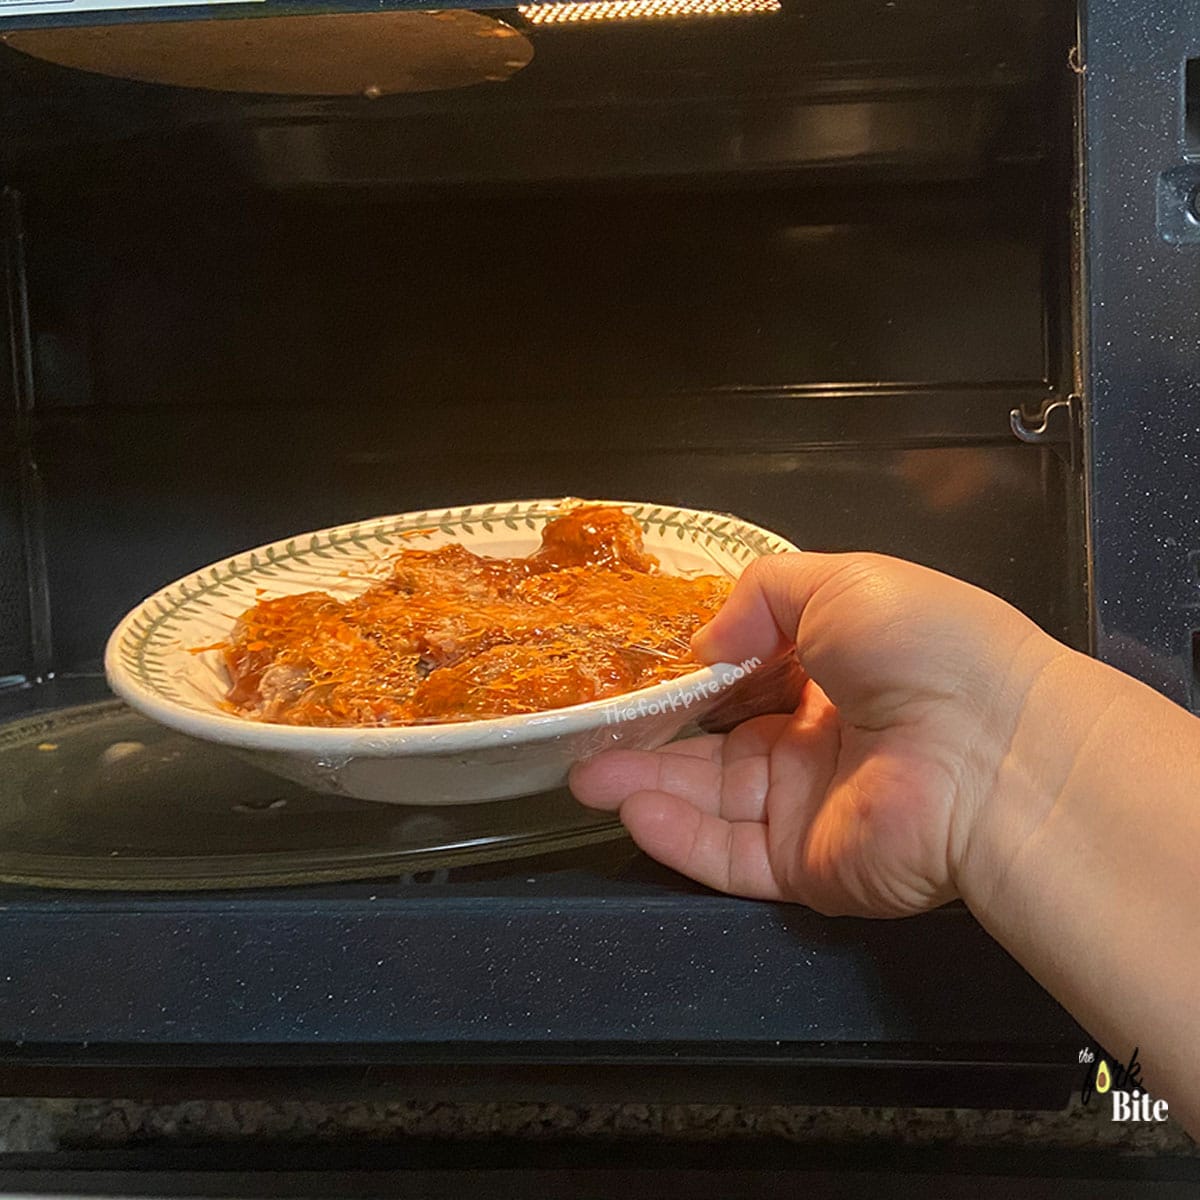 The two main reasons for covering food when you reheat it in the microwave are to stop the food from drying out. And of course, to prevent any potential splatter.